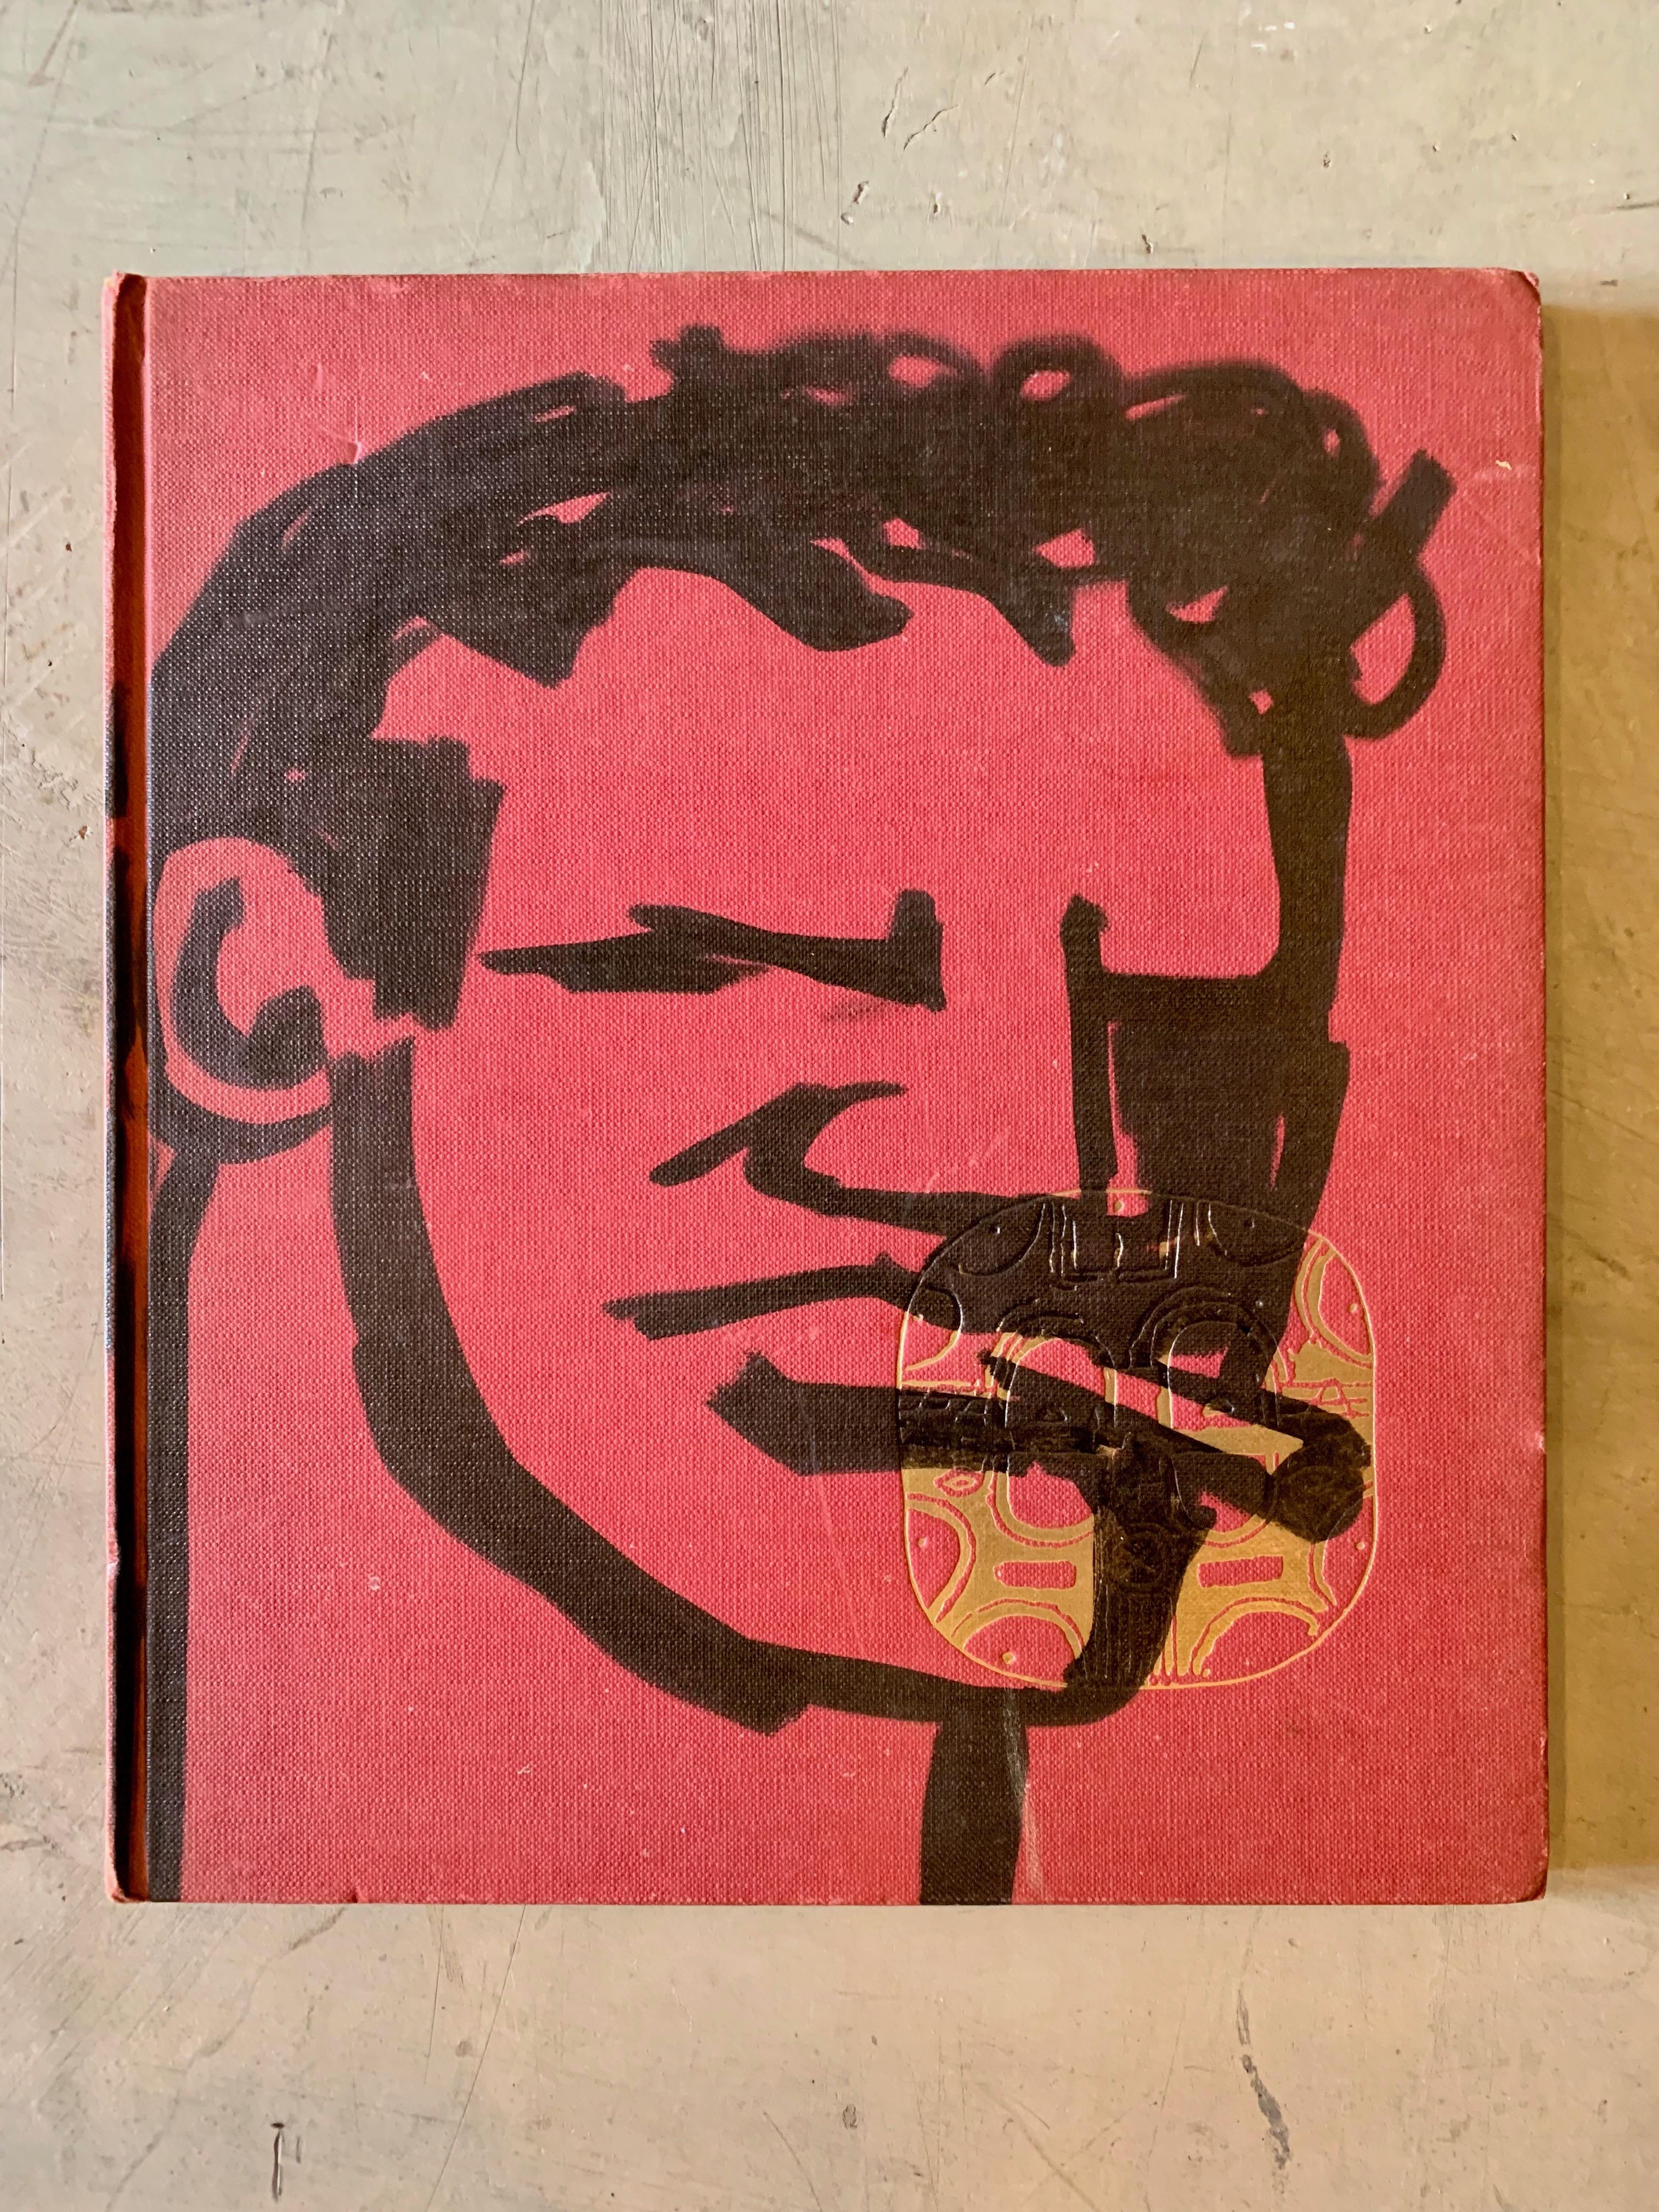 Fantastic original drawing by Robert Loughlin on an old book. Vintage African Art book. Red book with black drawing of 'the Brute' on the cover. Signed RL and dated 2003 on the inside. 

   